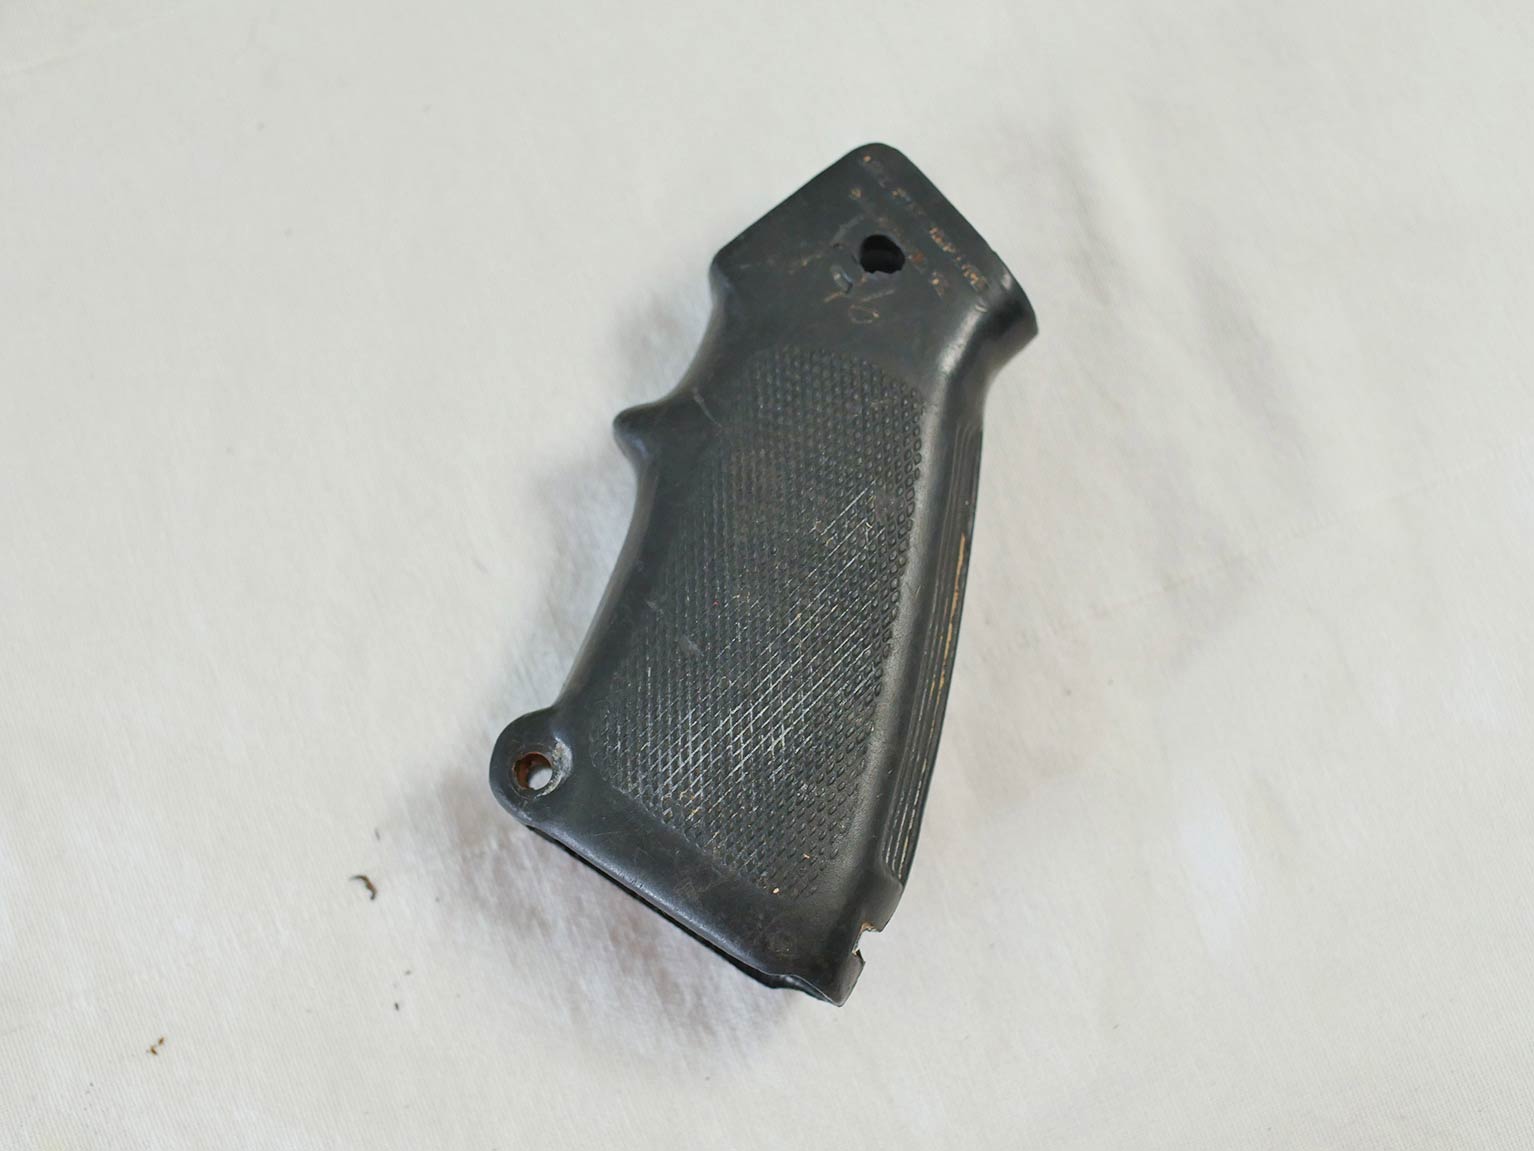 Bad shape lone star grip with hole drilled in it